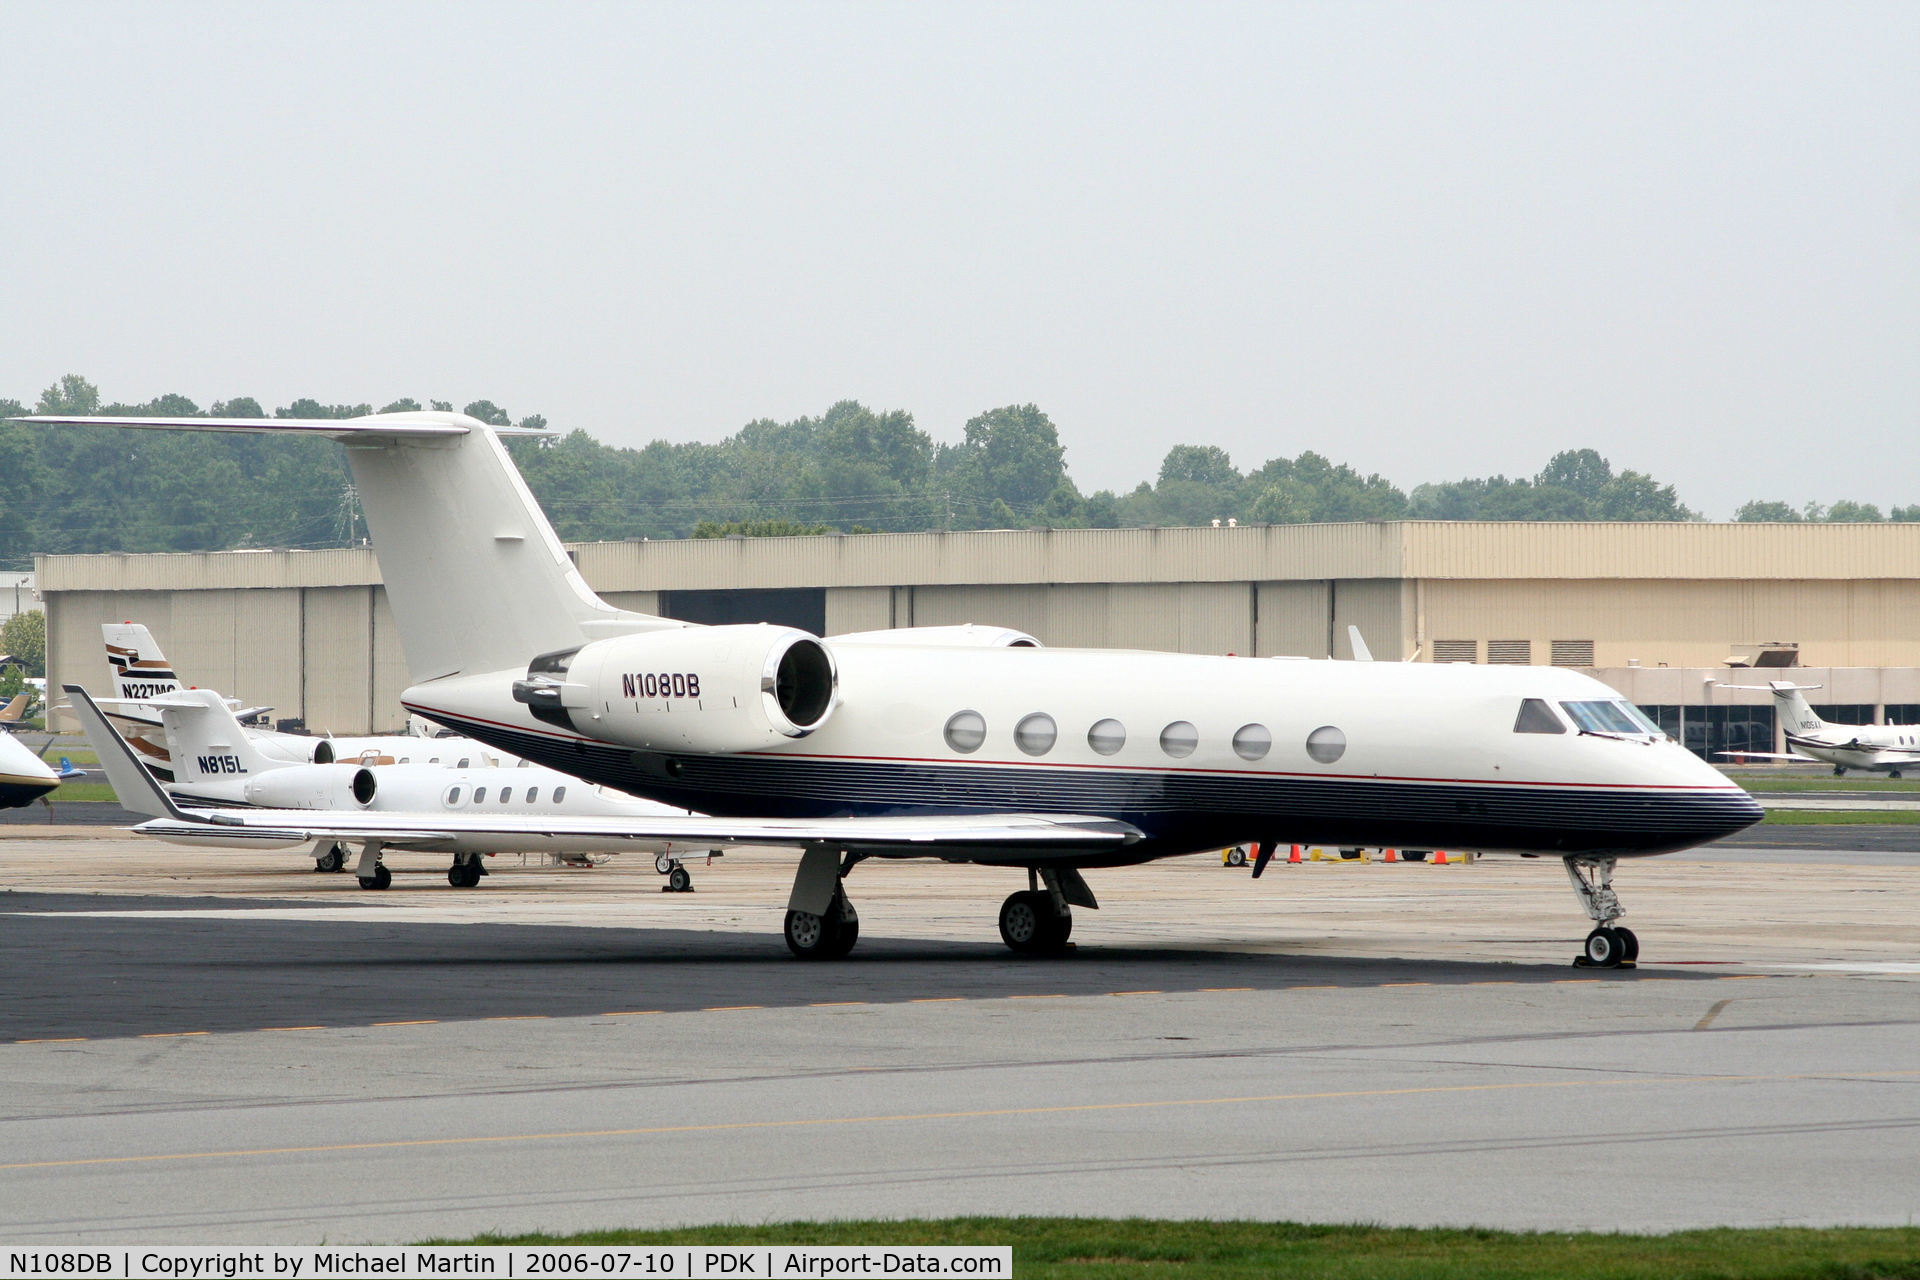 N108DB, 2008 Gulfstream Aerospace GV-SP (G550) C/N 5180, Tied down @ Epps with other aircraft